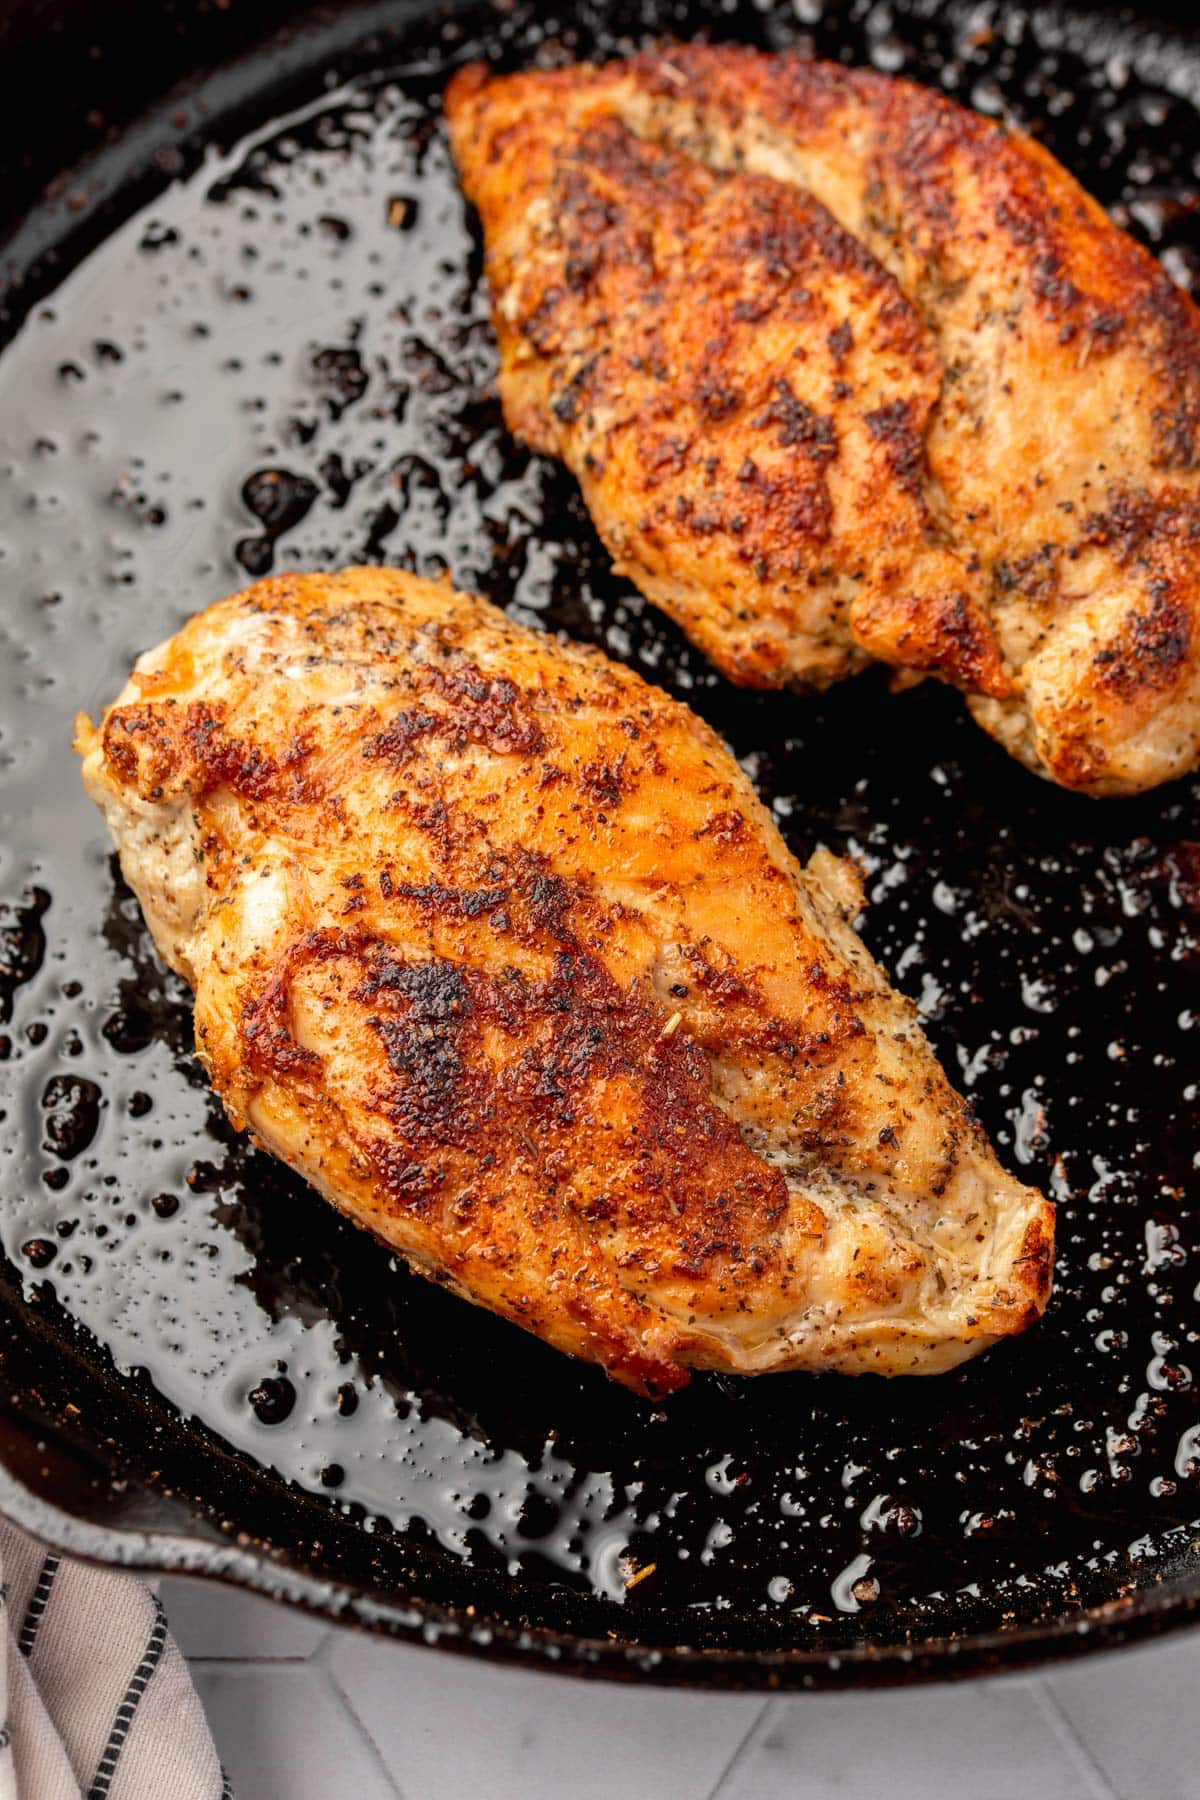 Two cooked chicken breasts in a cast iron skillet.